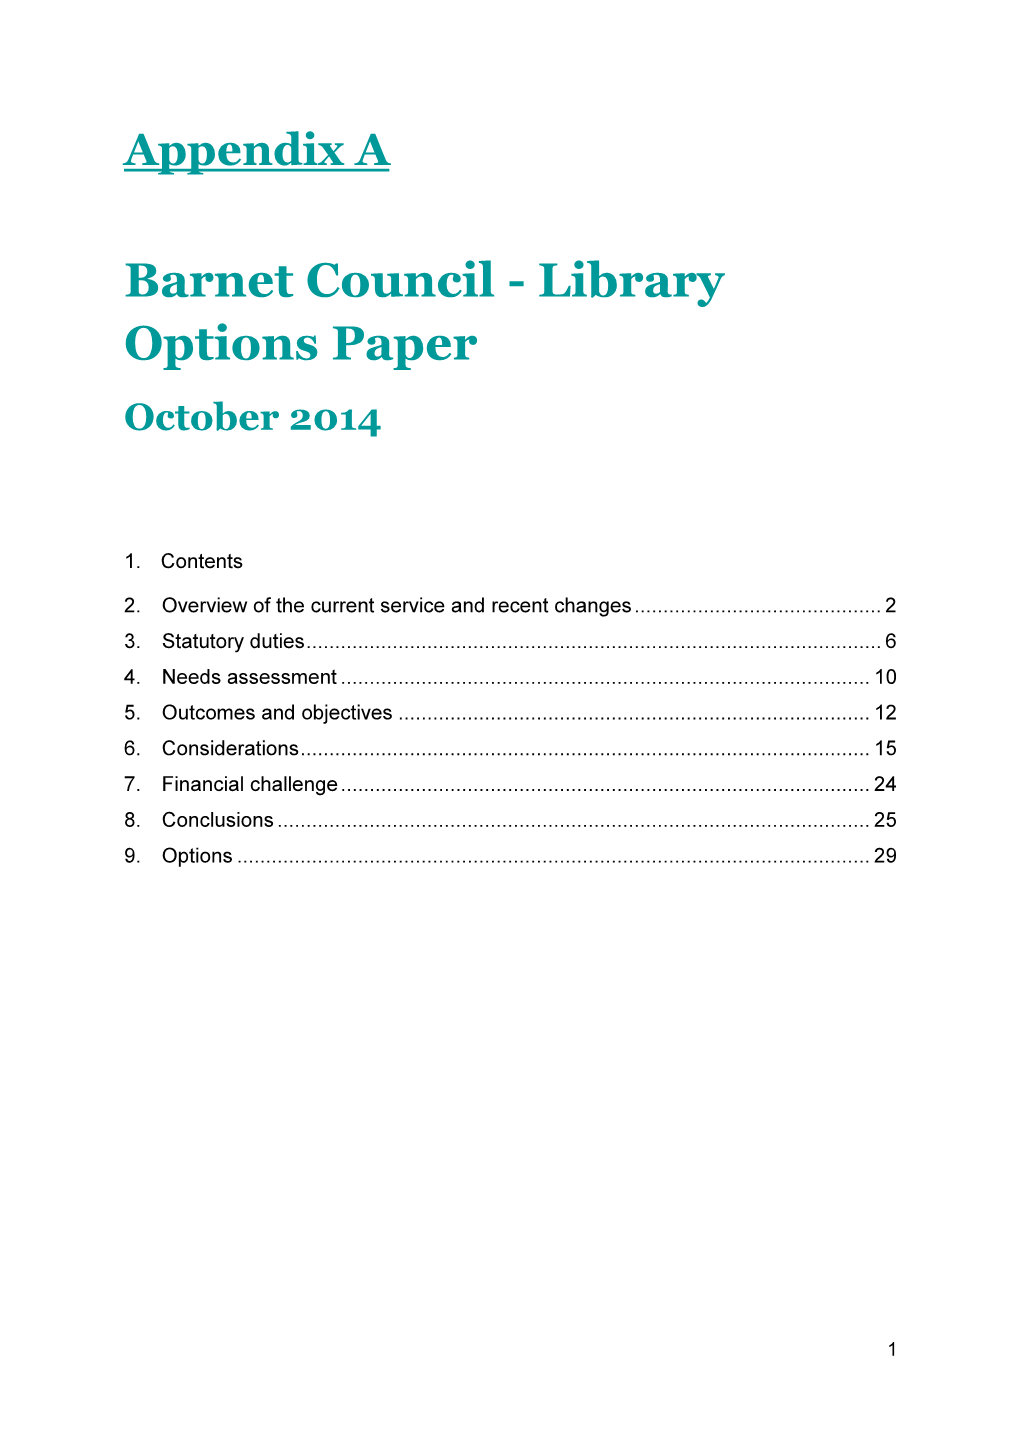 Library Options Paper October 2014